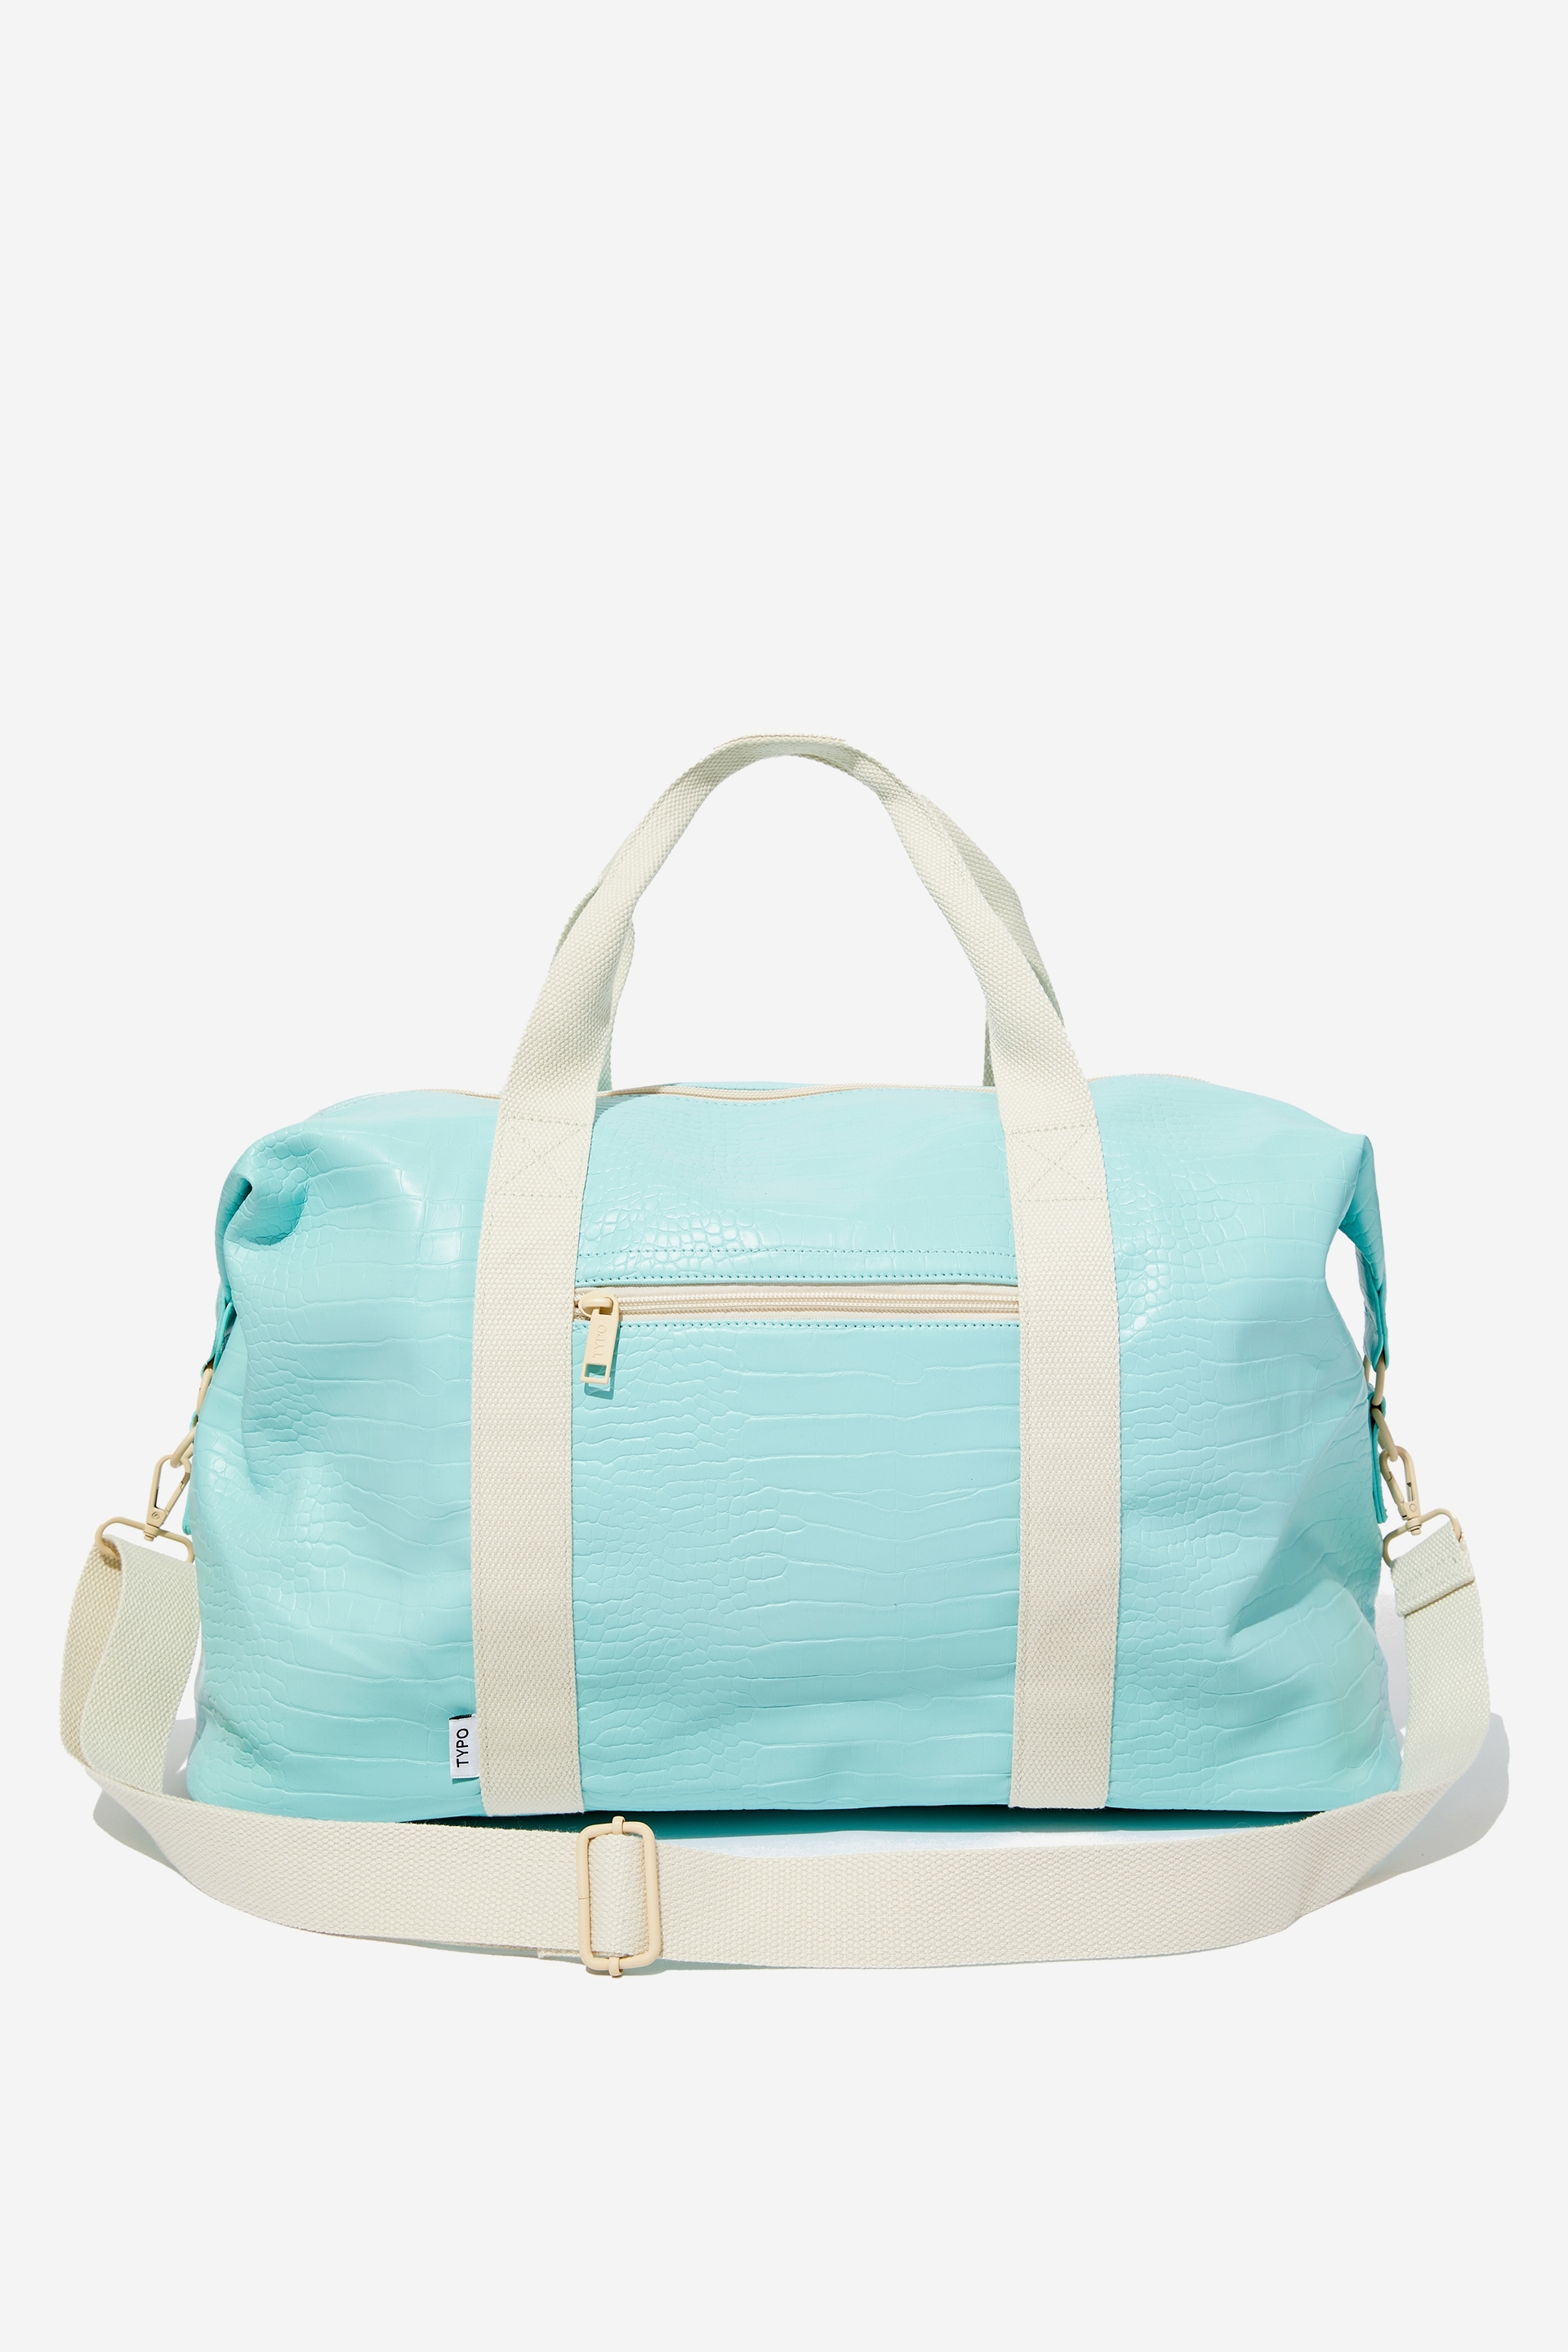 Typo - Off The Grid Hold All Duffle Bag - Minty skies textured